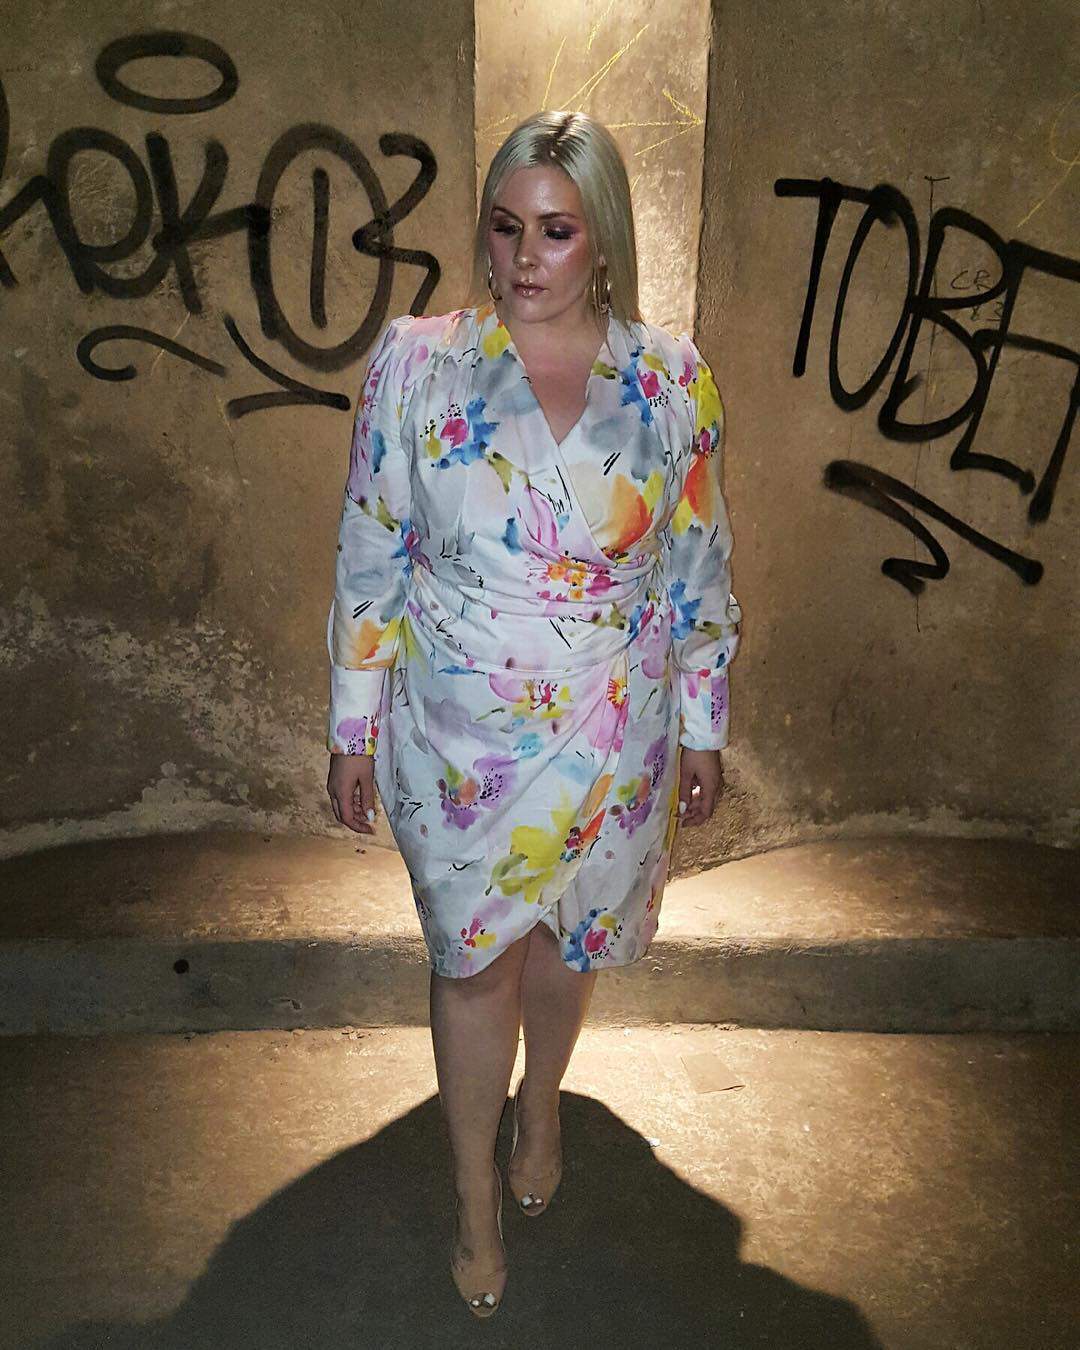 Plus size blogger spotlight- blonde in the district